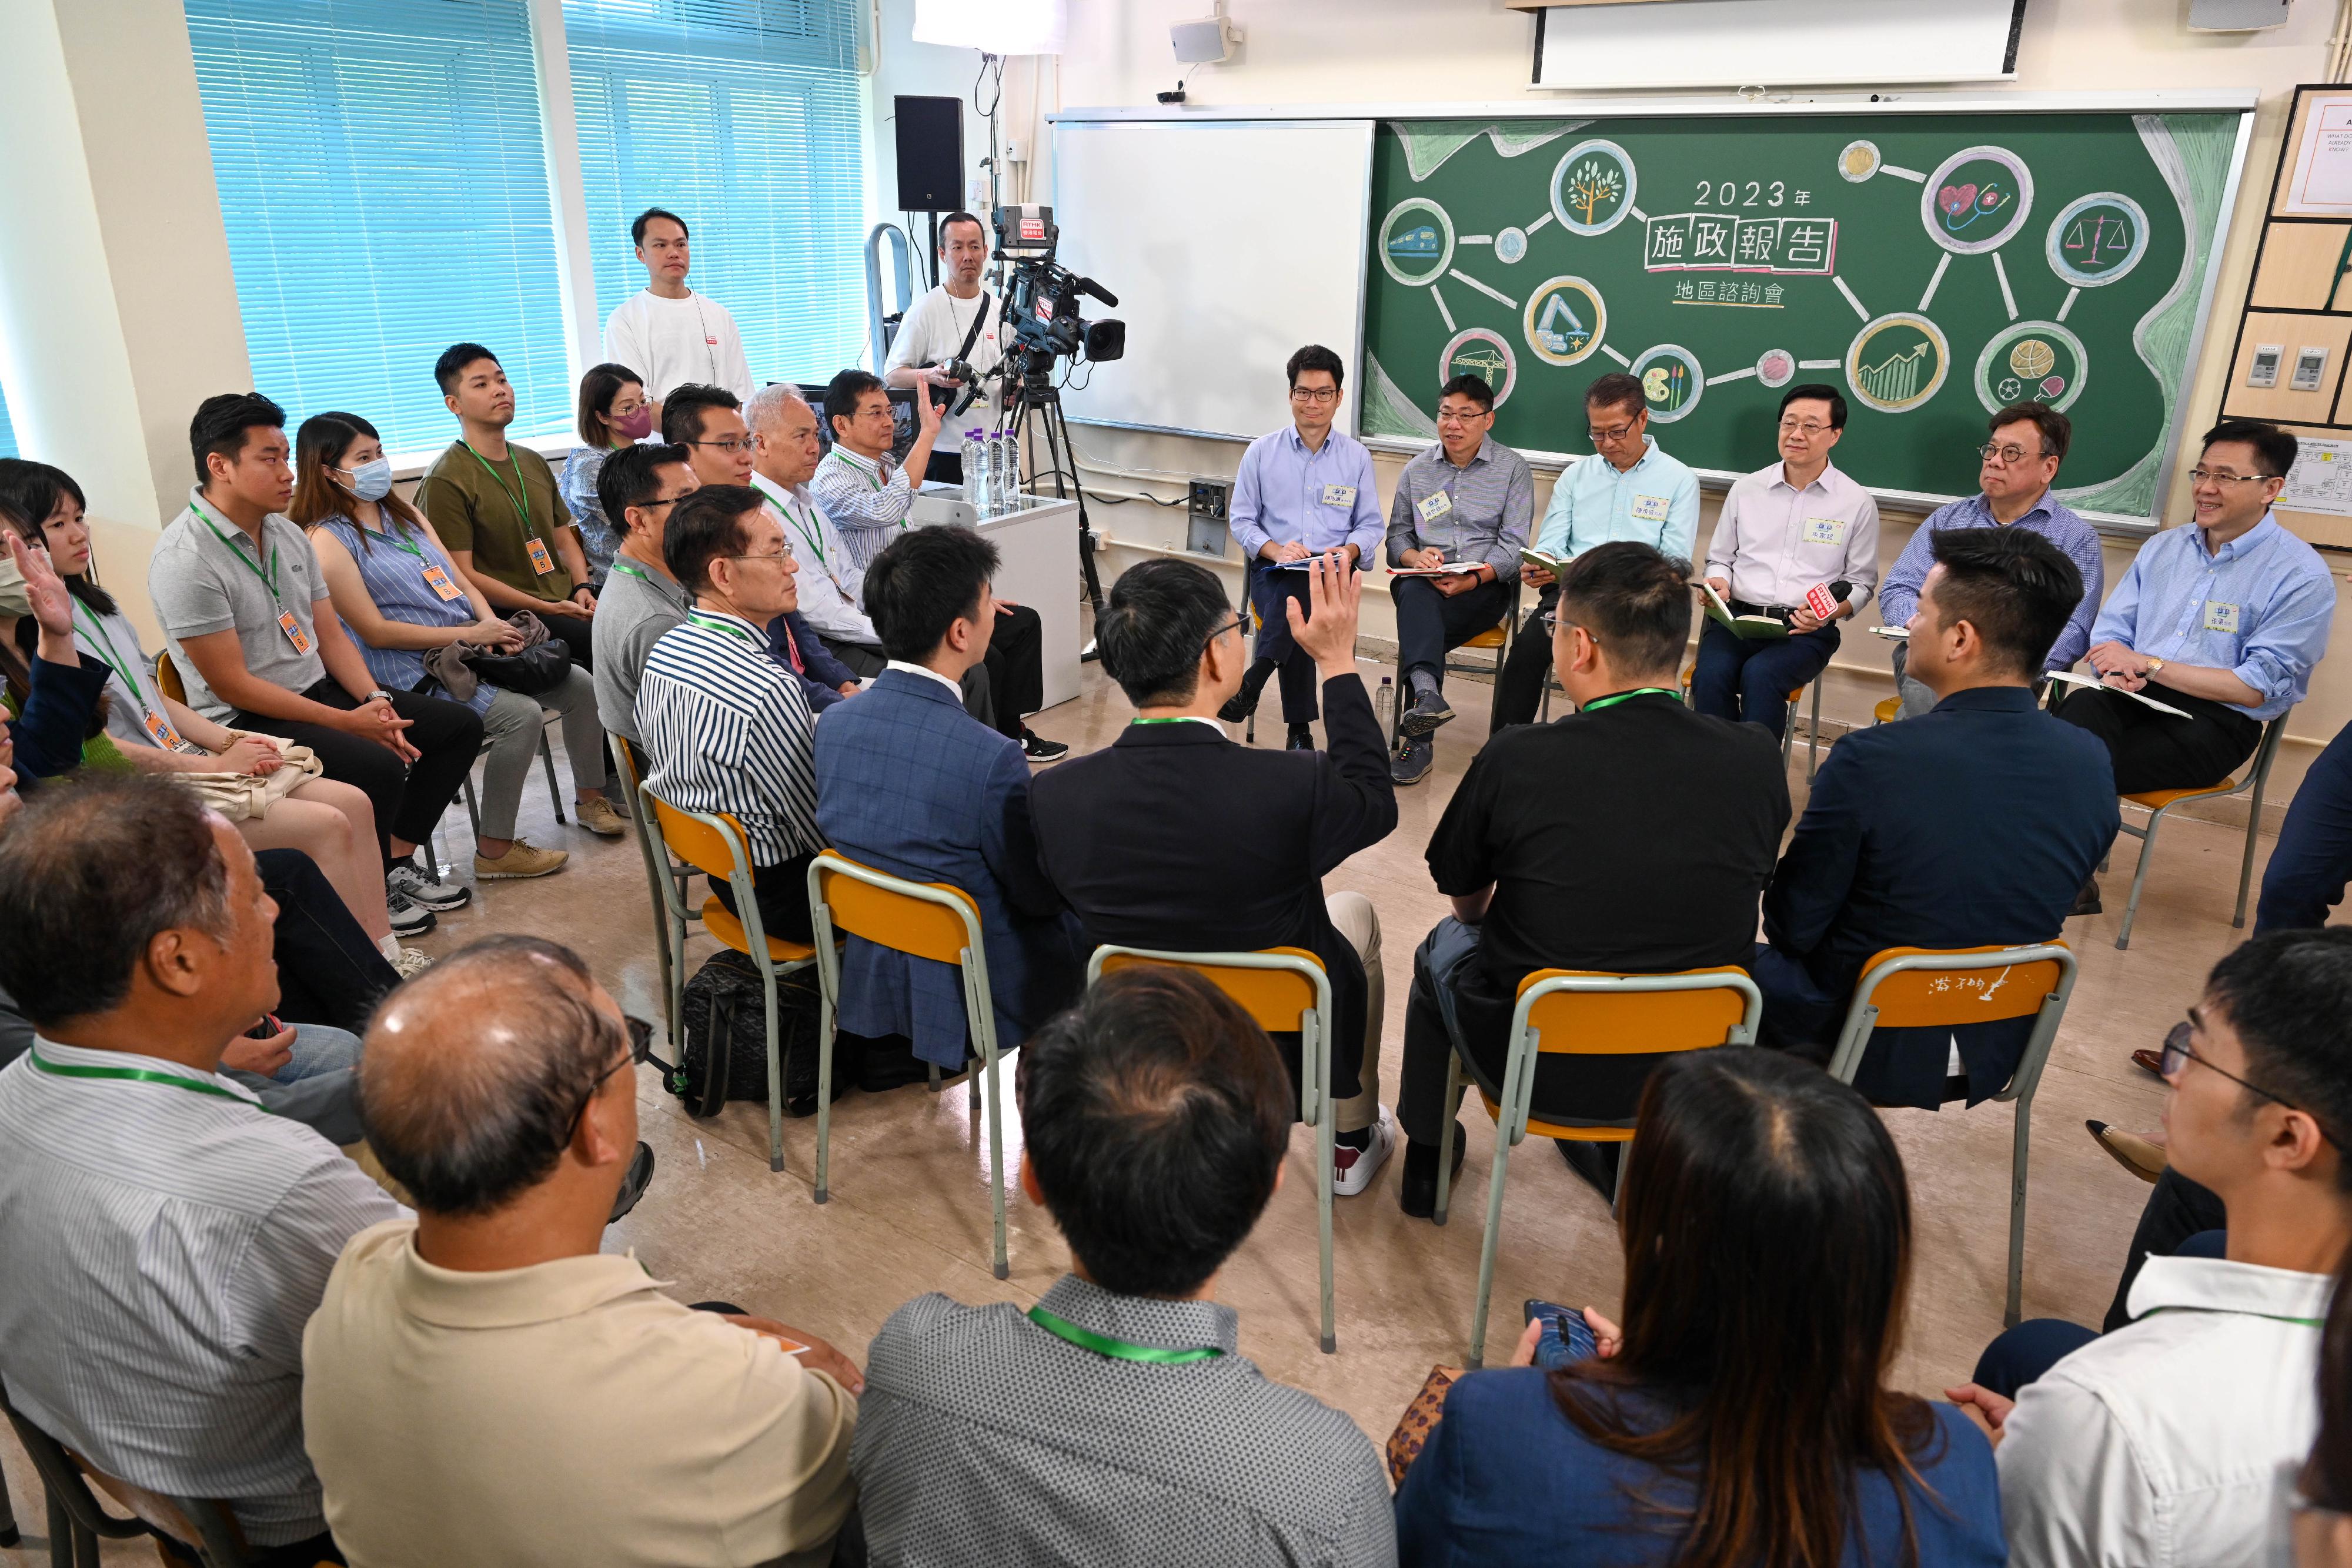 The Chief Executive, Mr John Lee, attended the second 2023 Policy Address District Forum with Principal Officials this morning (August 27) to listen to views and suggestions of local community members on the upcoming Policy Address. Photo shows Mr Lee (third right); the Financial Secretary, Mr Paul Chan (third left); the Secretary for Commerce and Economic Development, Mr Algernon Yau (second right); the Secretary for Transport and Logistics, Mr Lam Sai-hung (second left); the Secretary for Innovation, Technology and Industry, Professor Sun Dong (first right); and the Acting Secretary for Financial Services and the Treasury, Mr Joseph Chan (first left), listening to views of the public at the consultation session.